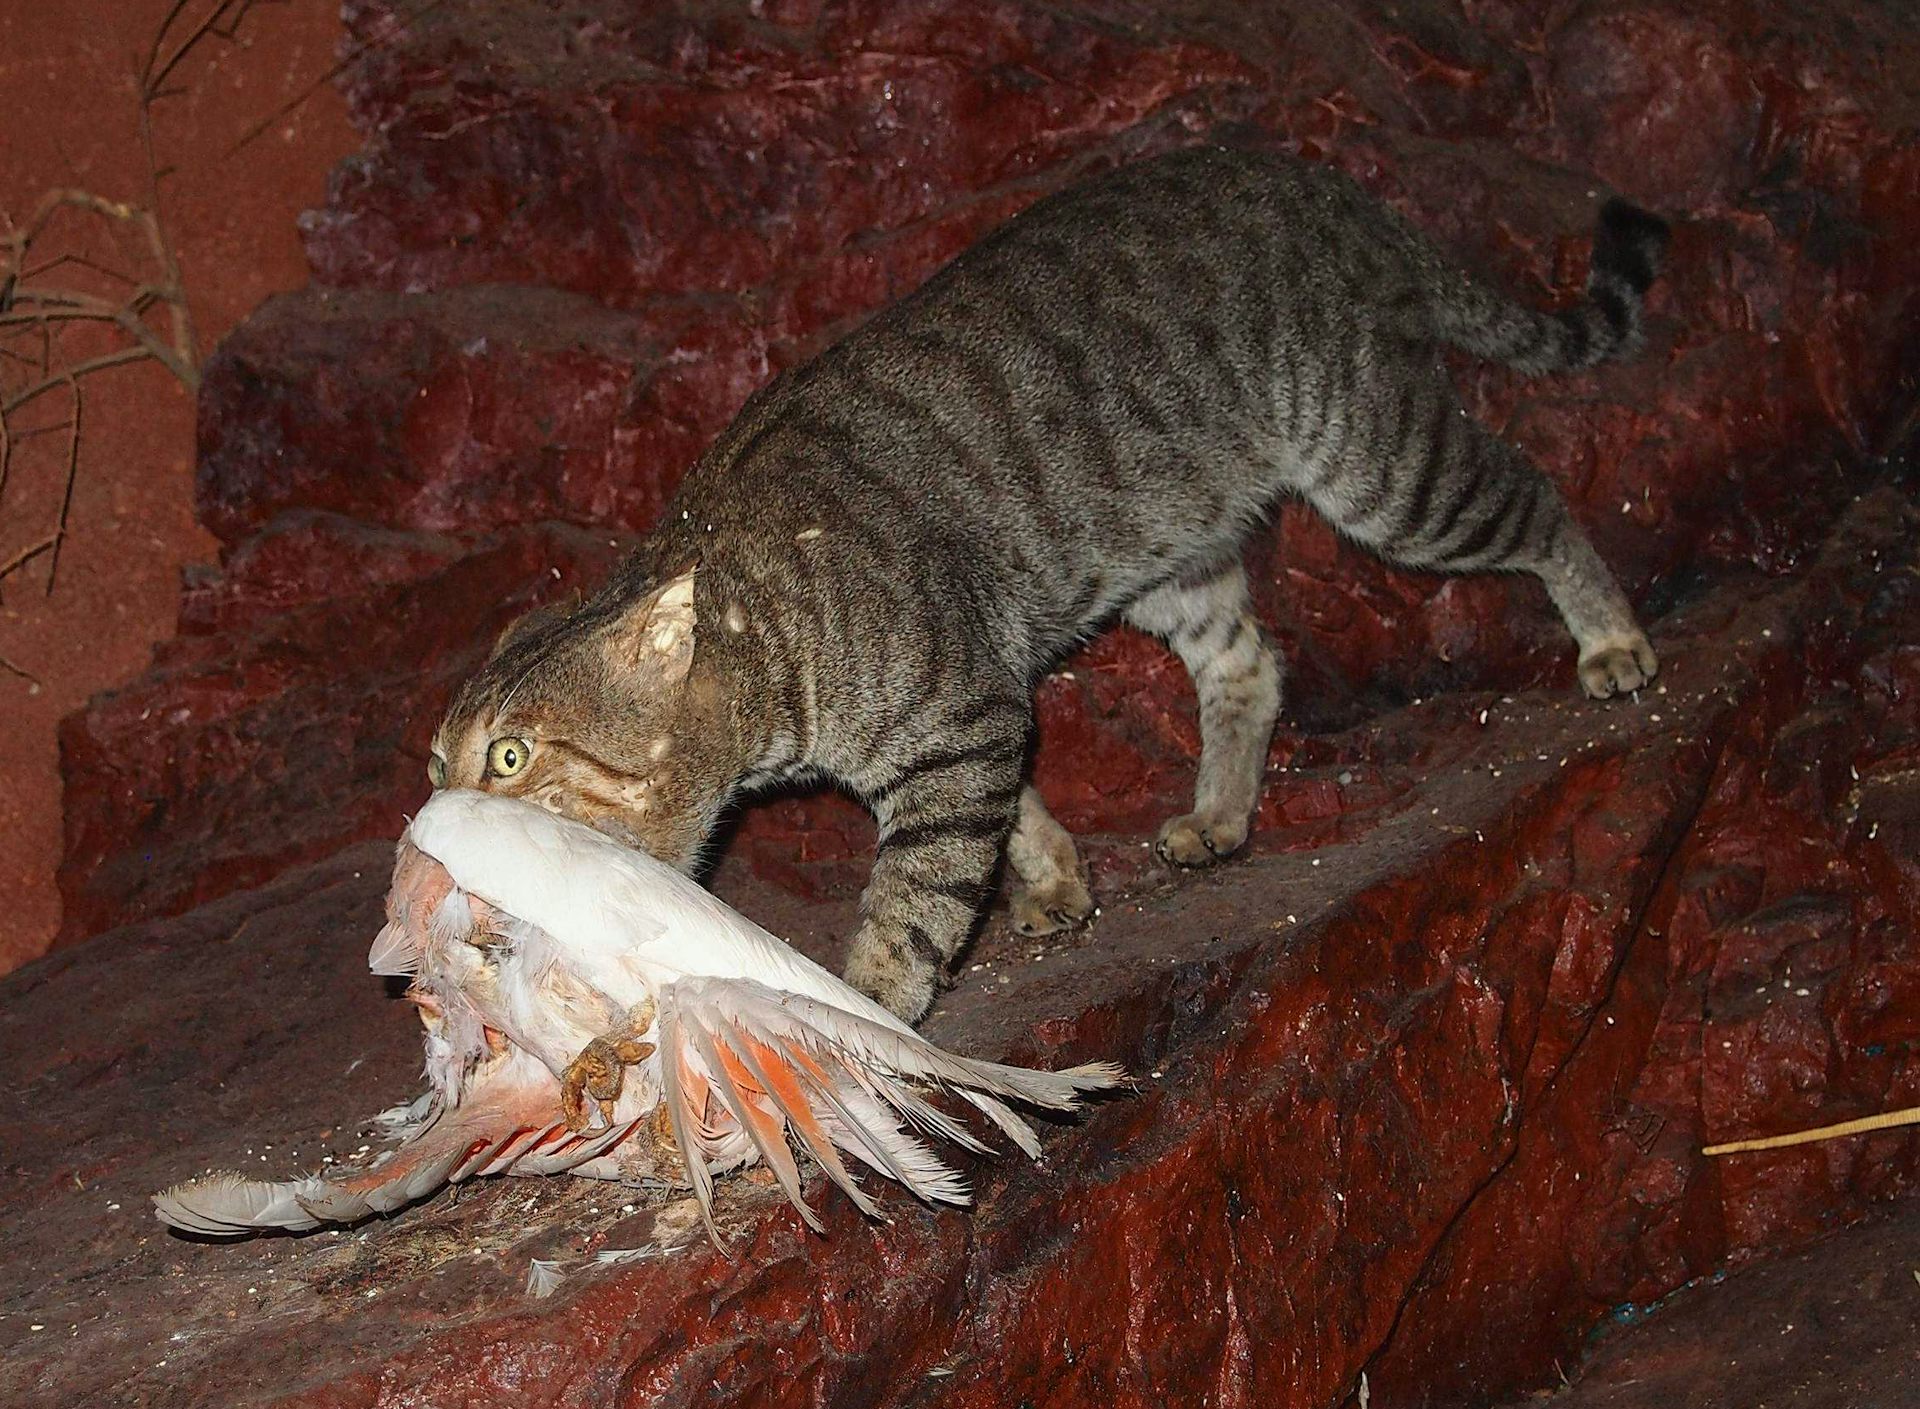 releasing feral cats in the wild